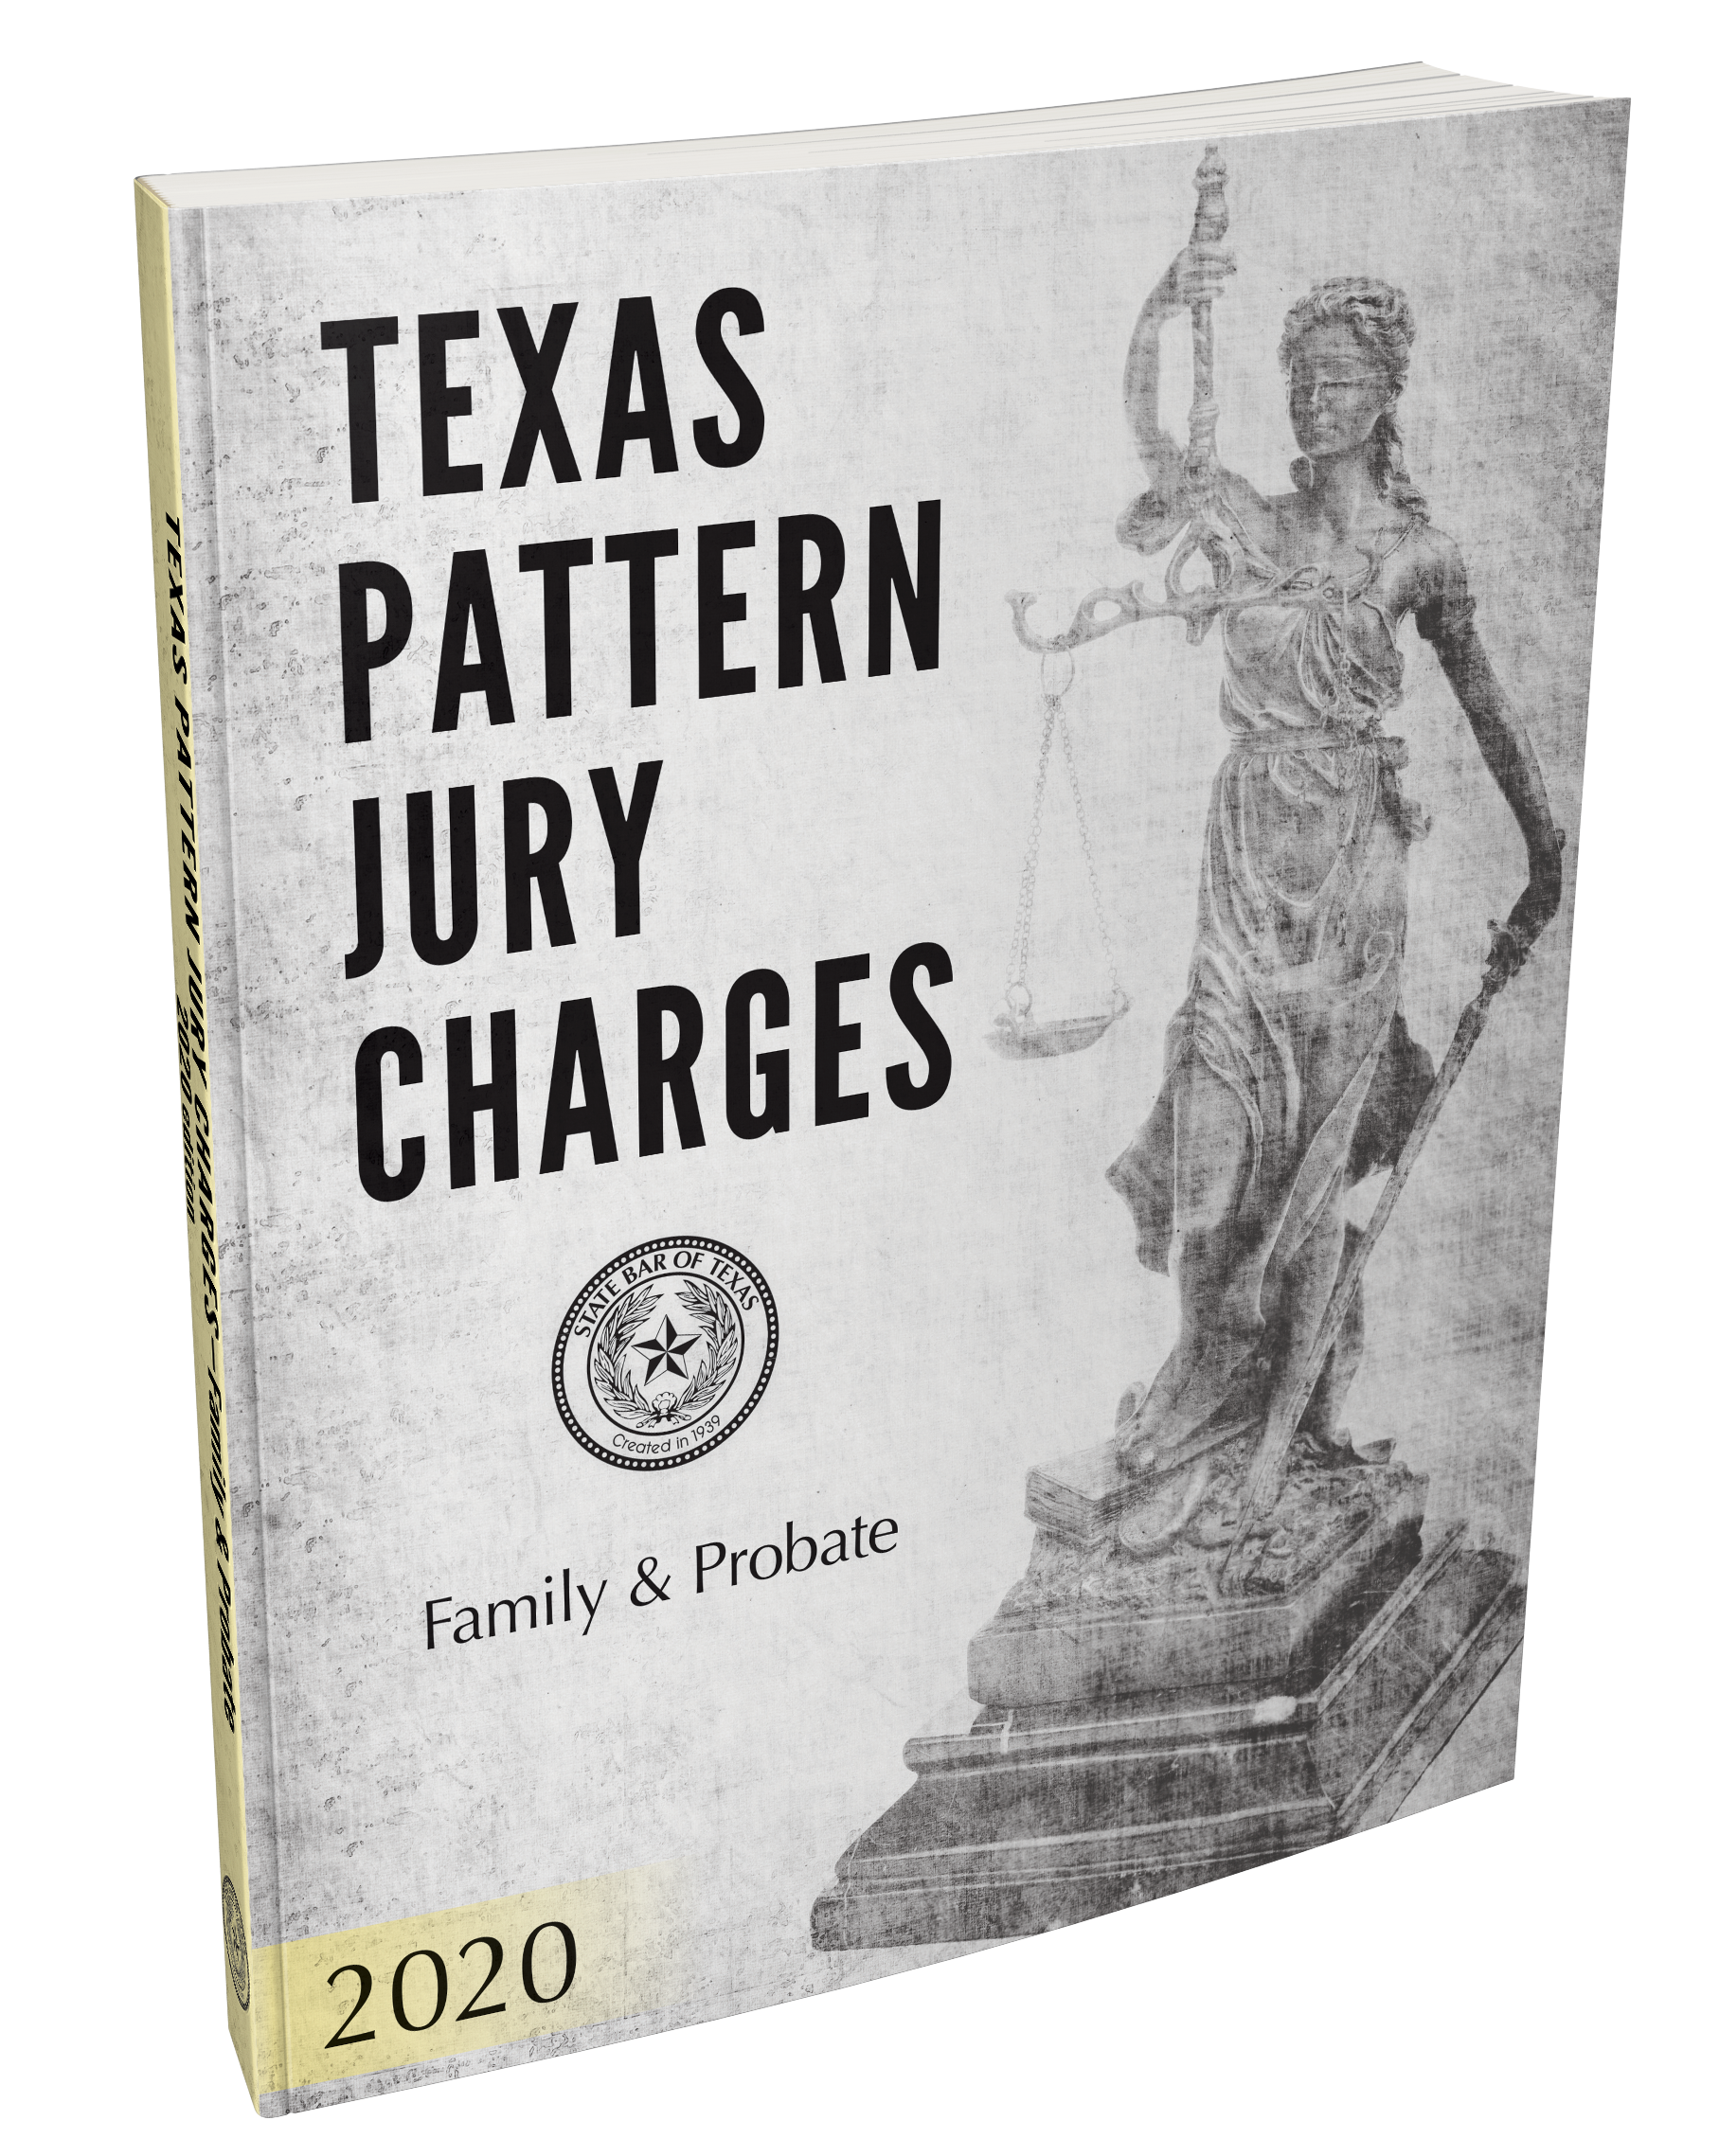 Texas Pattern Jury Charges – Family & Probate (2022)